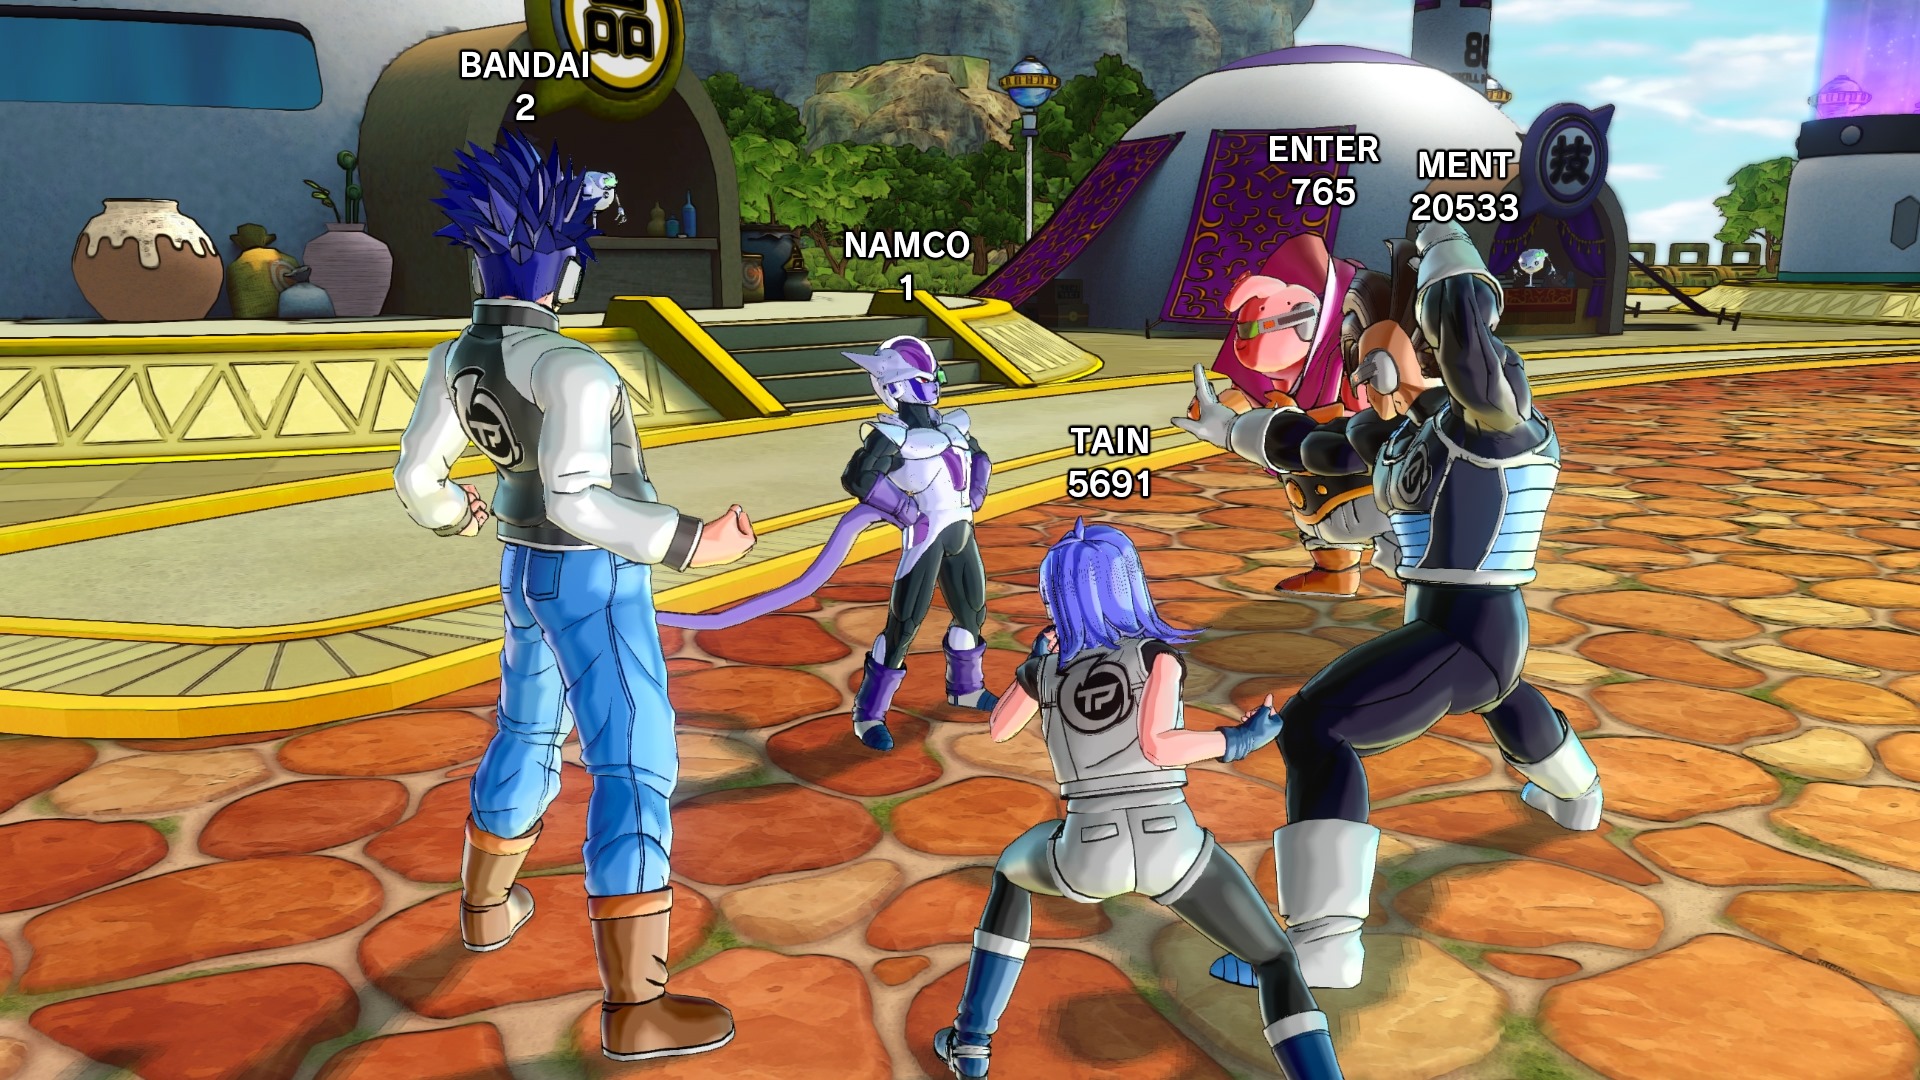 Dragon ball xenoverse download torrent no steam games